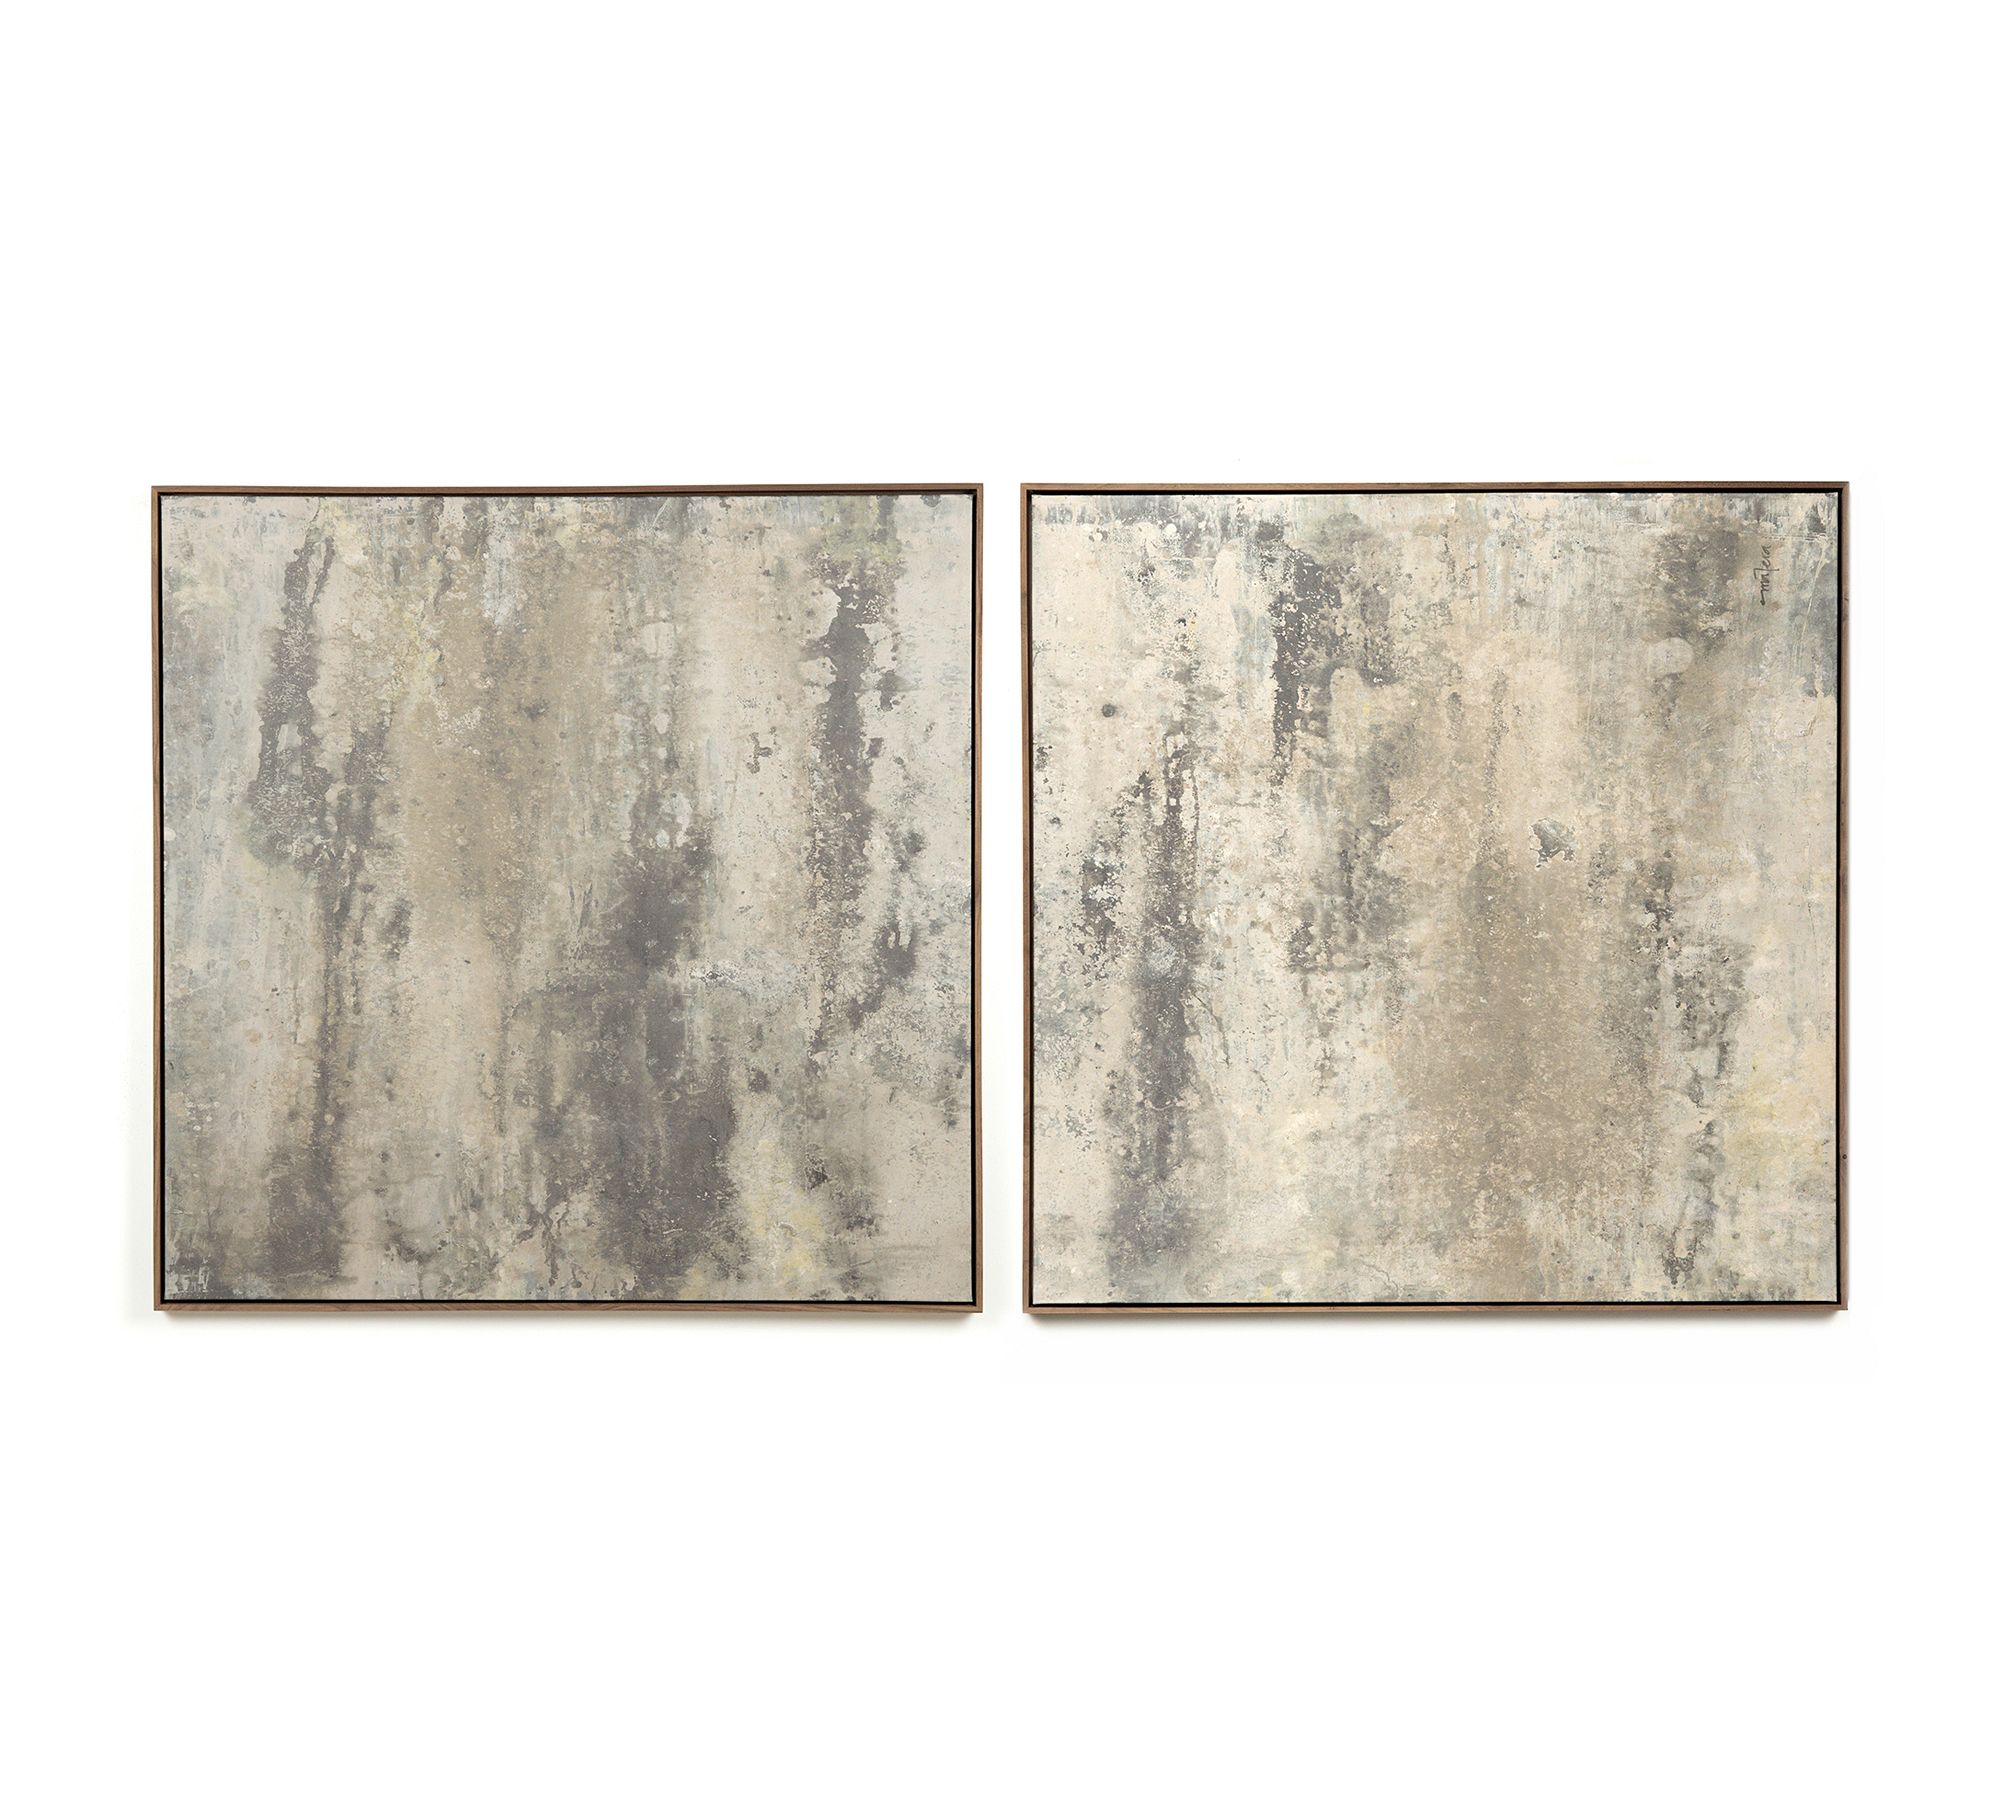 Penumbra Diptych By Matera